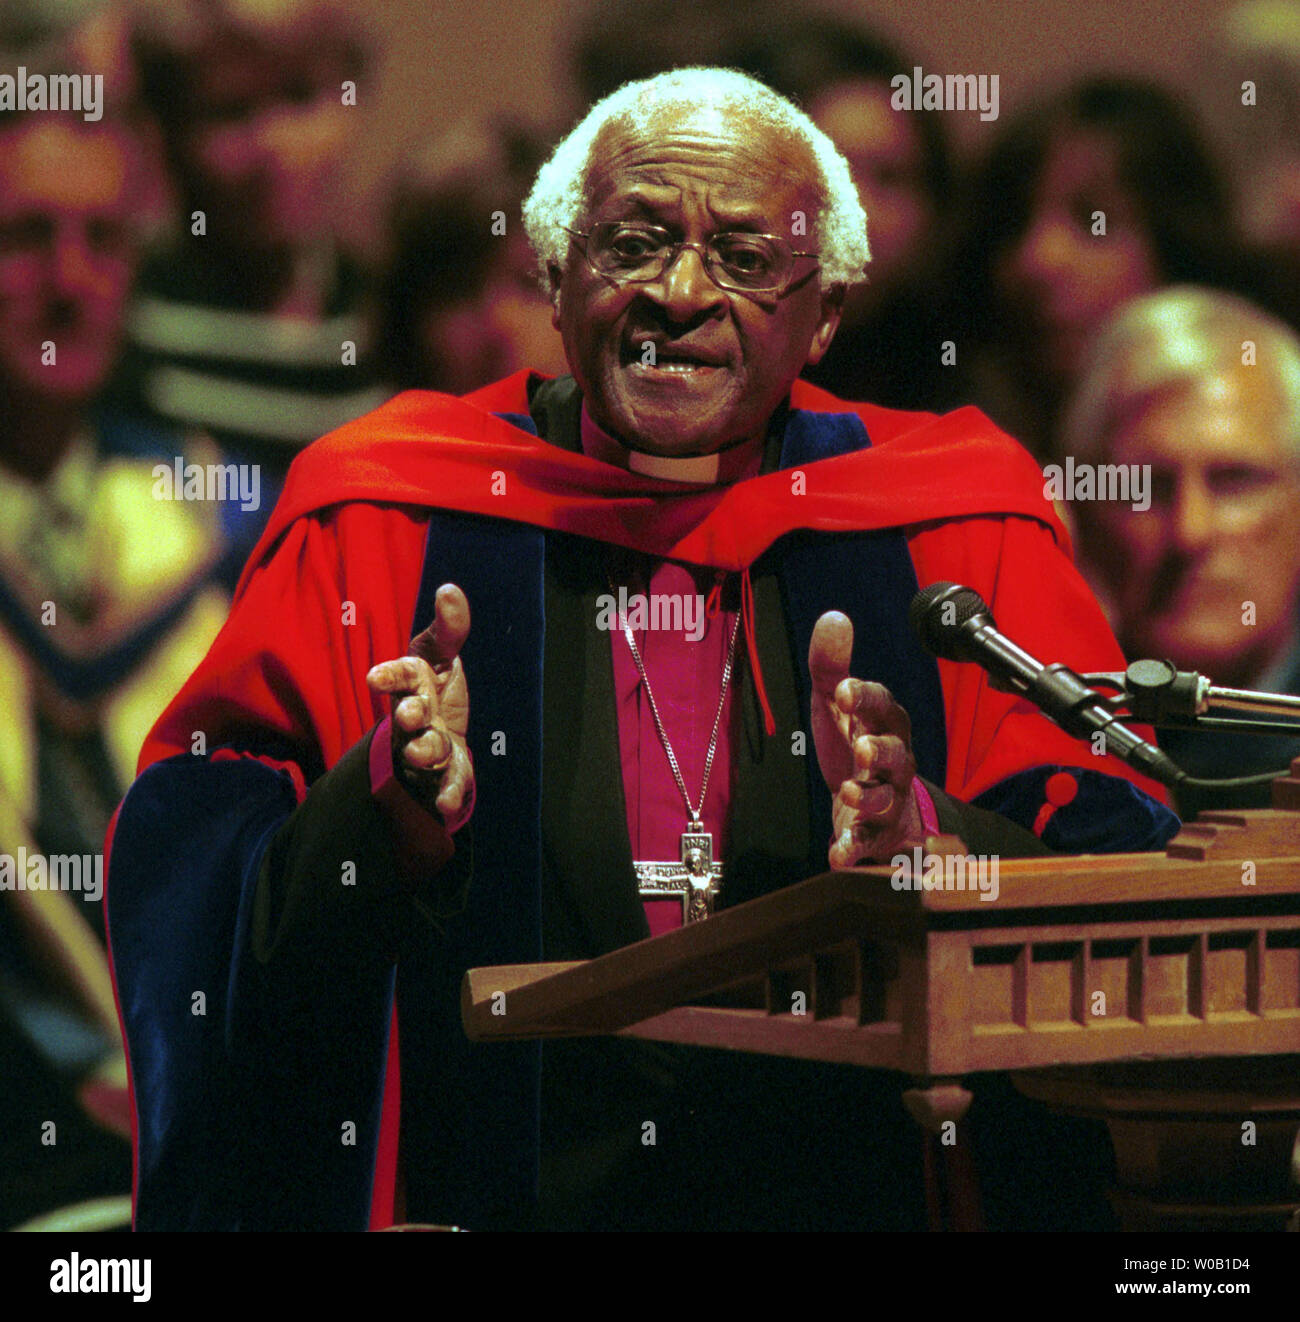 After receiving his University of British Columbia (UBC) Honorary Doctor of Laws Degree Archbishop Desmond Tutu gives a rousing talk to a select audience at the University's Chan Center for the Performing Arts in Vancouver, April 19,2004.  (UPI Photo/H. Ruckemann) Stock Photo